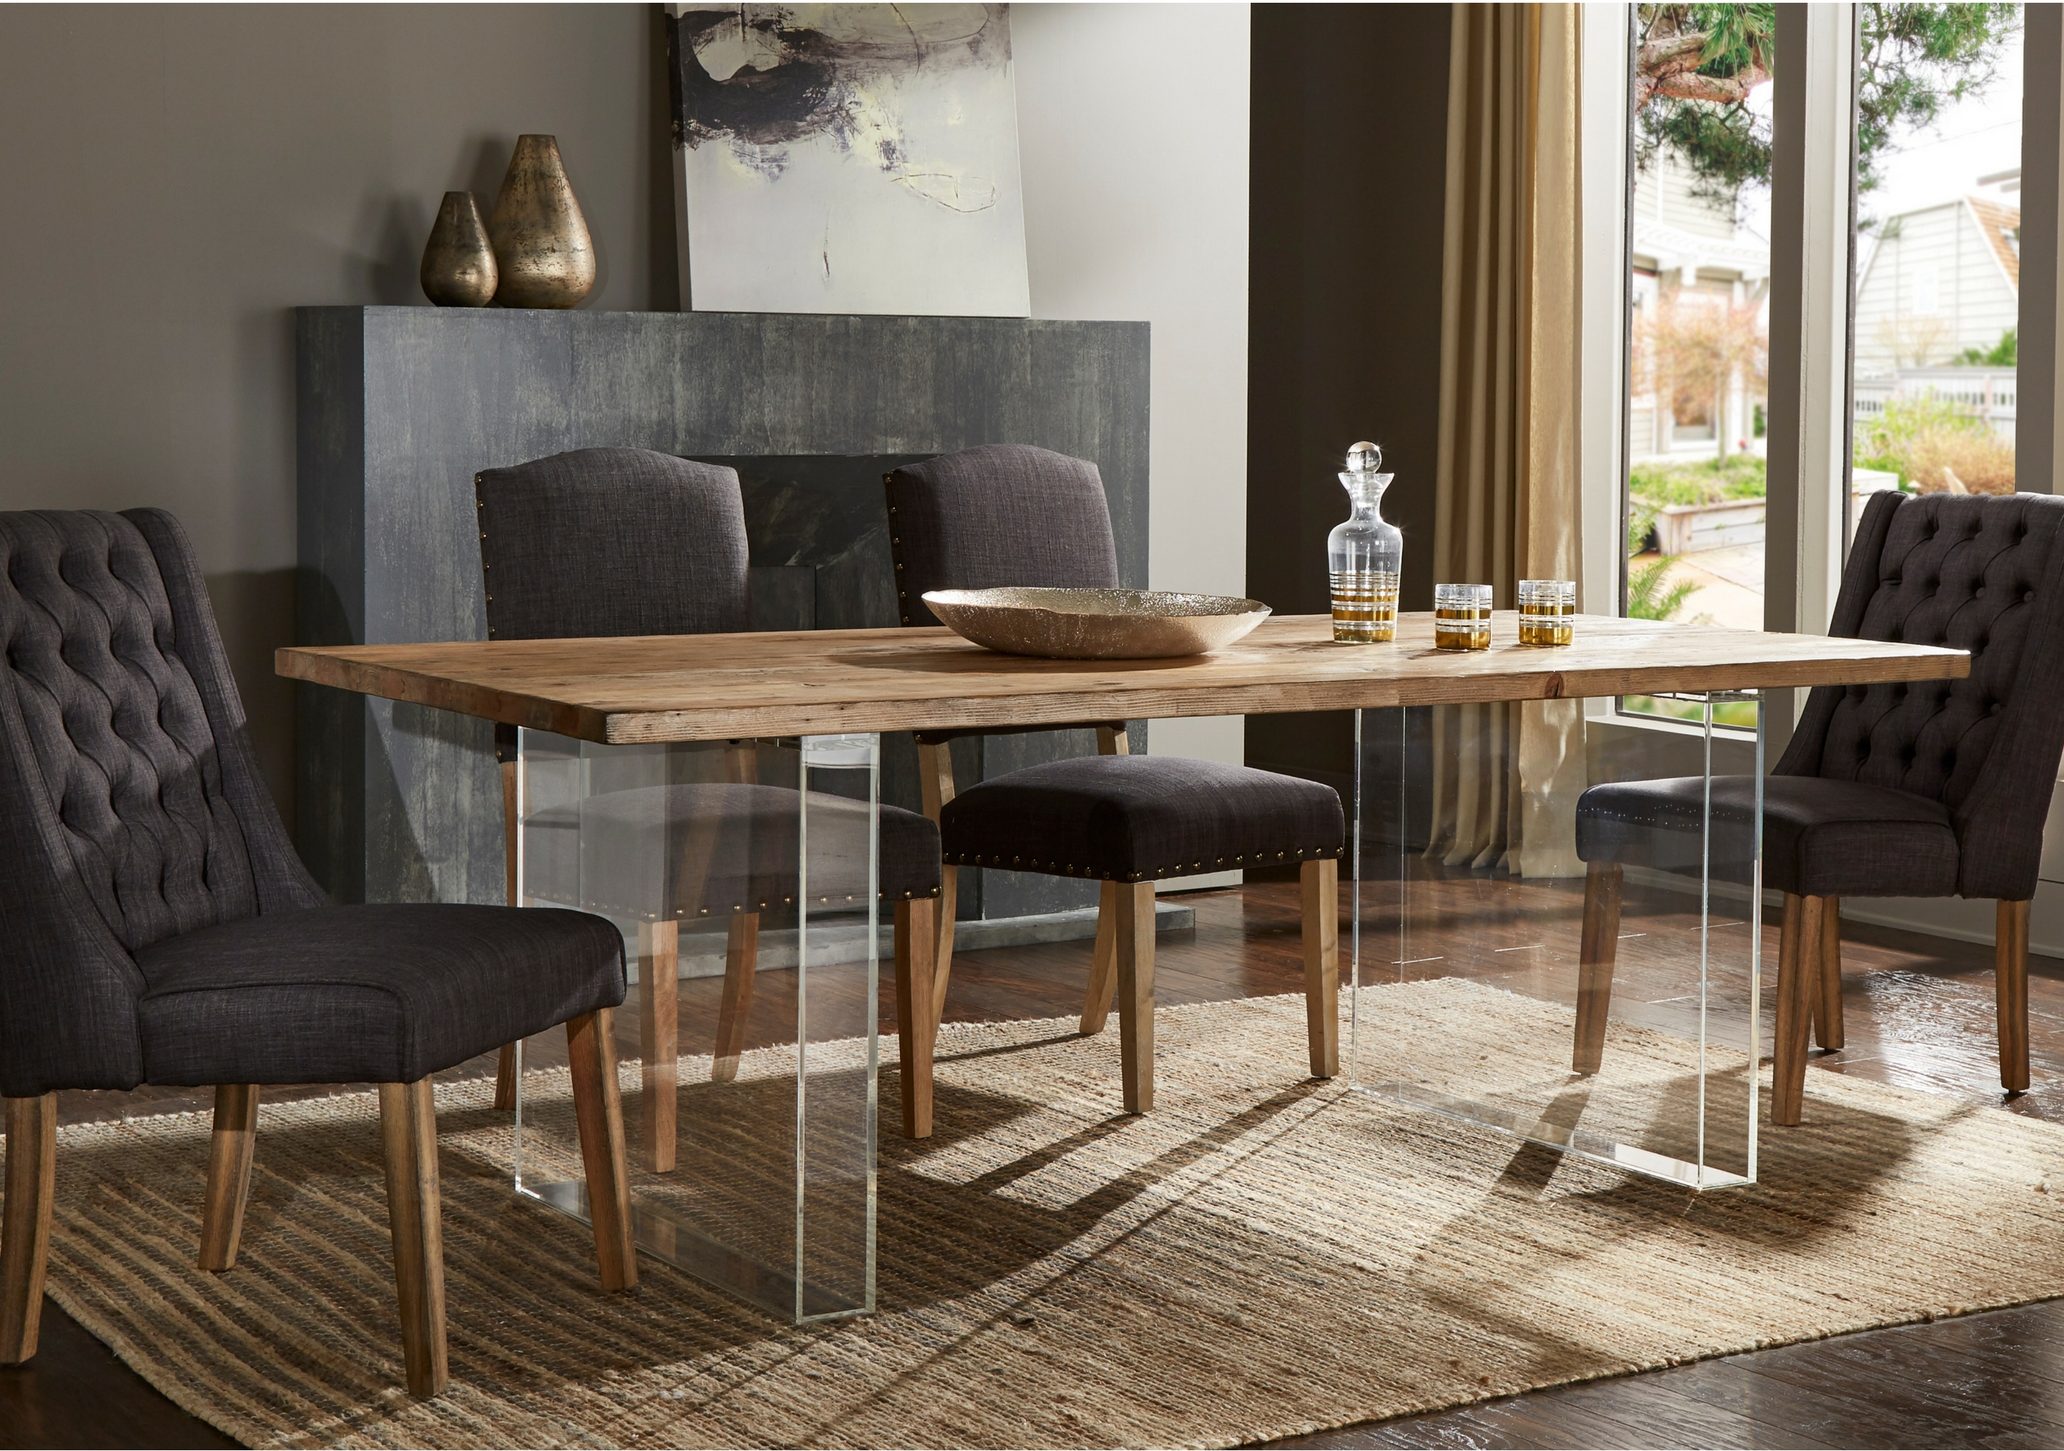 Blending artisan with modern, this one of the 10 inspiring dining combinations features a dining table with a reclaimed wood table top and clear acrylic block legs. Surrounding the table are four dark grey linen upholstered chairs. The table top is decorated minimally with a few glasses and a decanter.